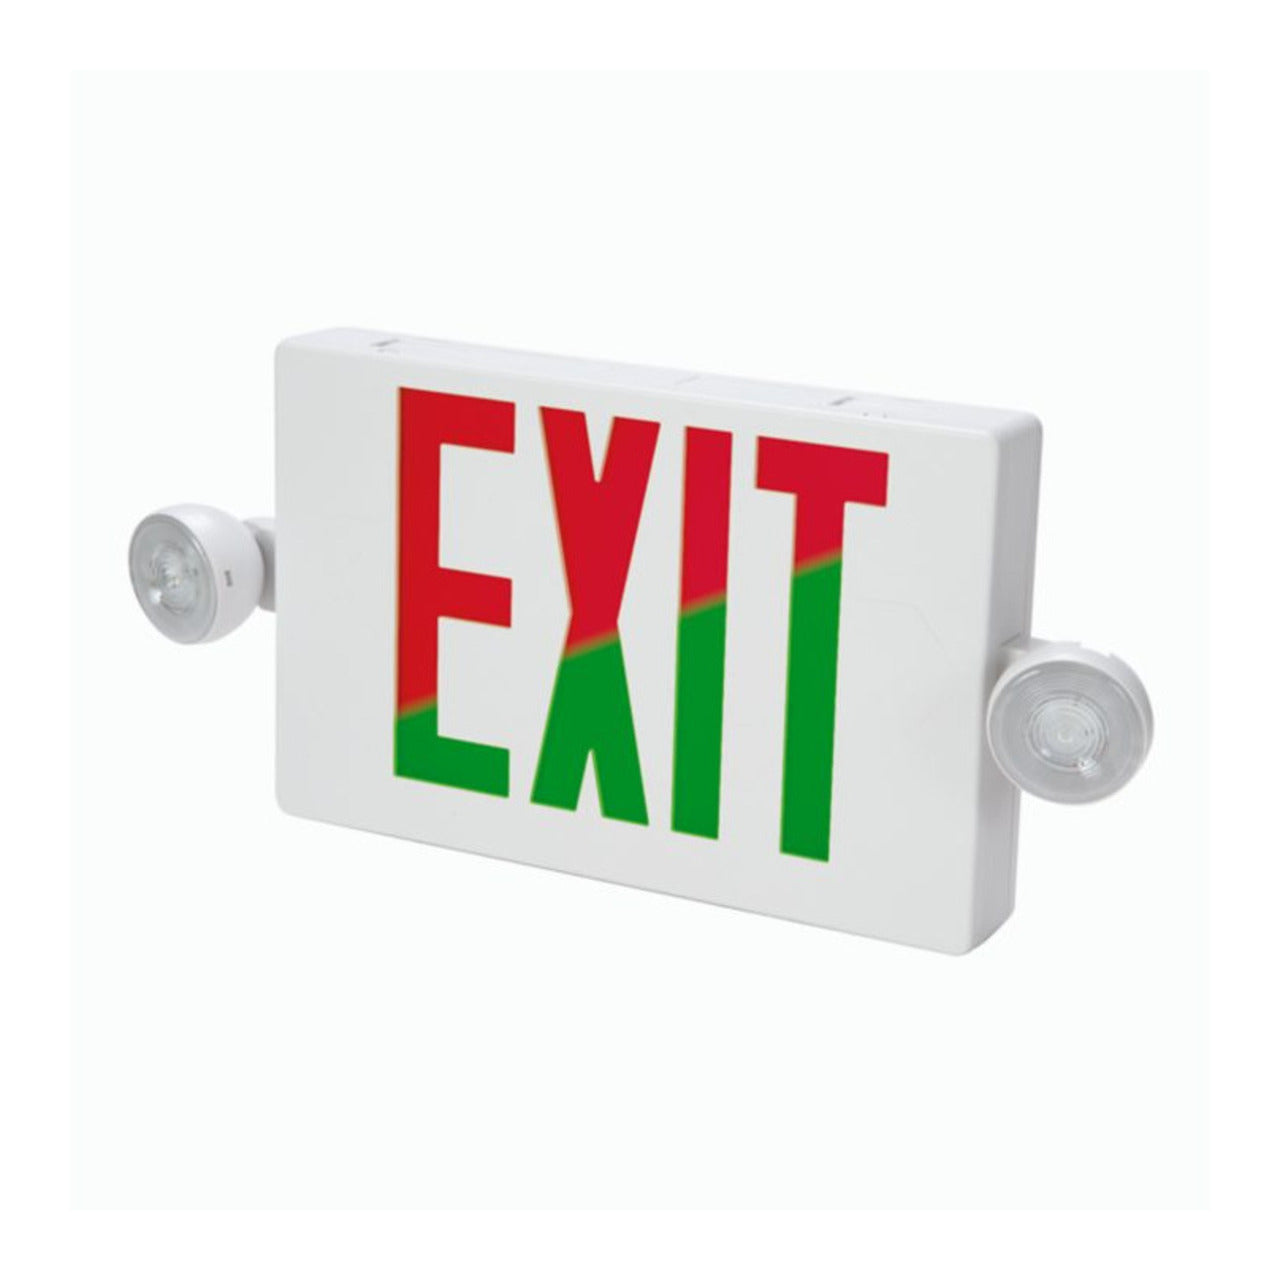 LED Combination Exit Sign w/ Emergency Lights, Red/Green Letters, Remote Capacity, White Housing